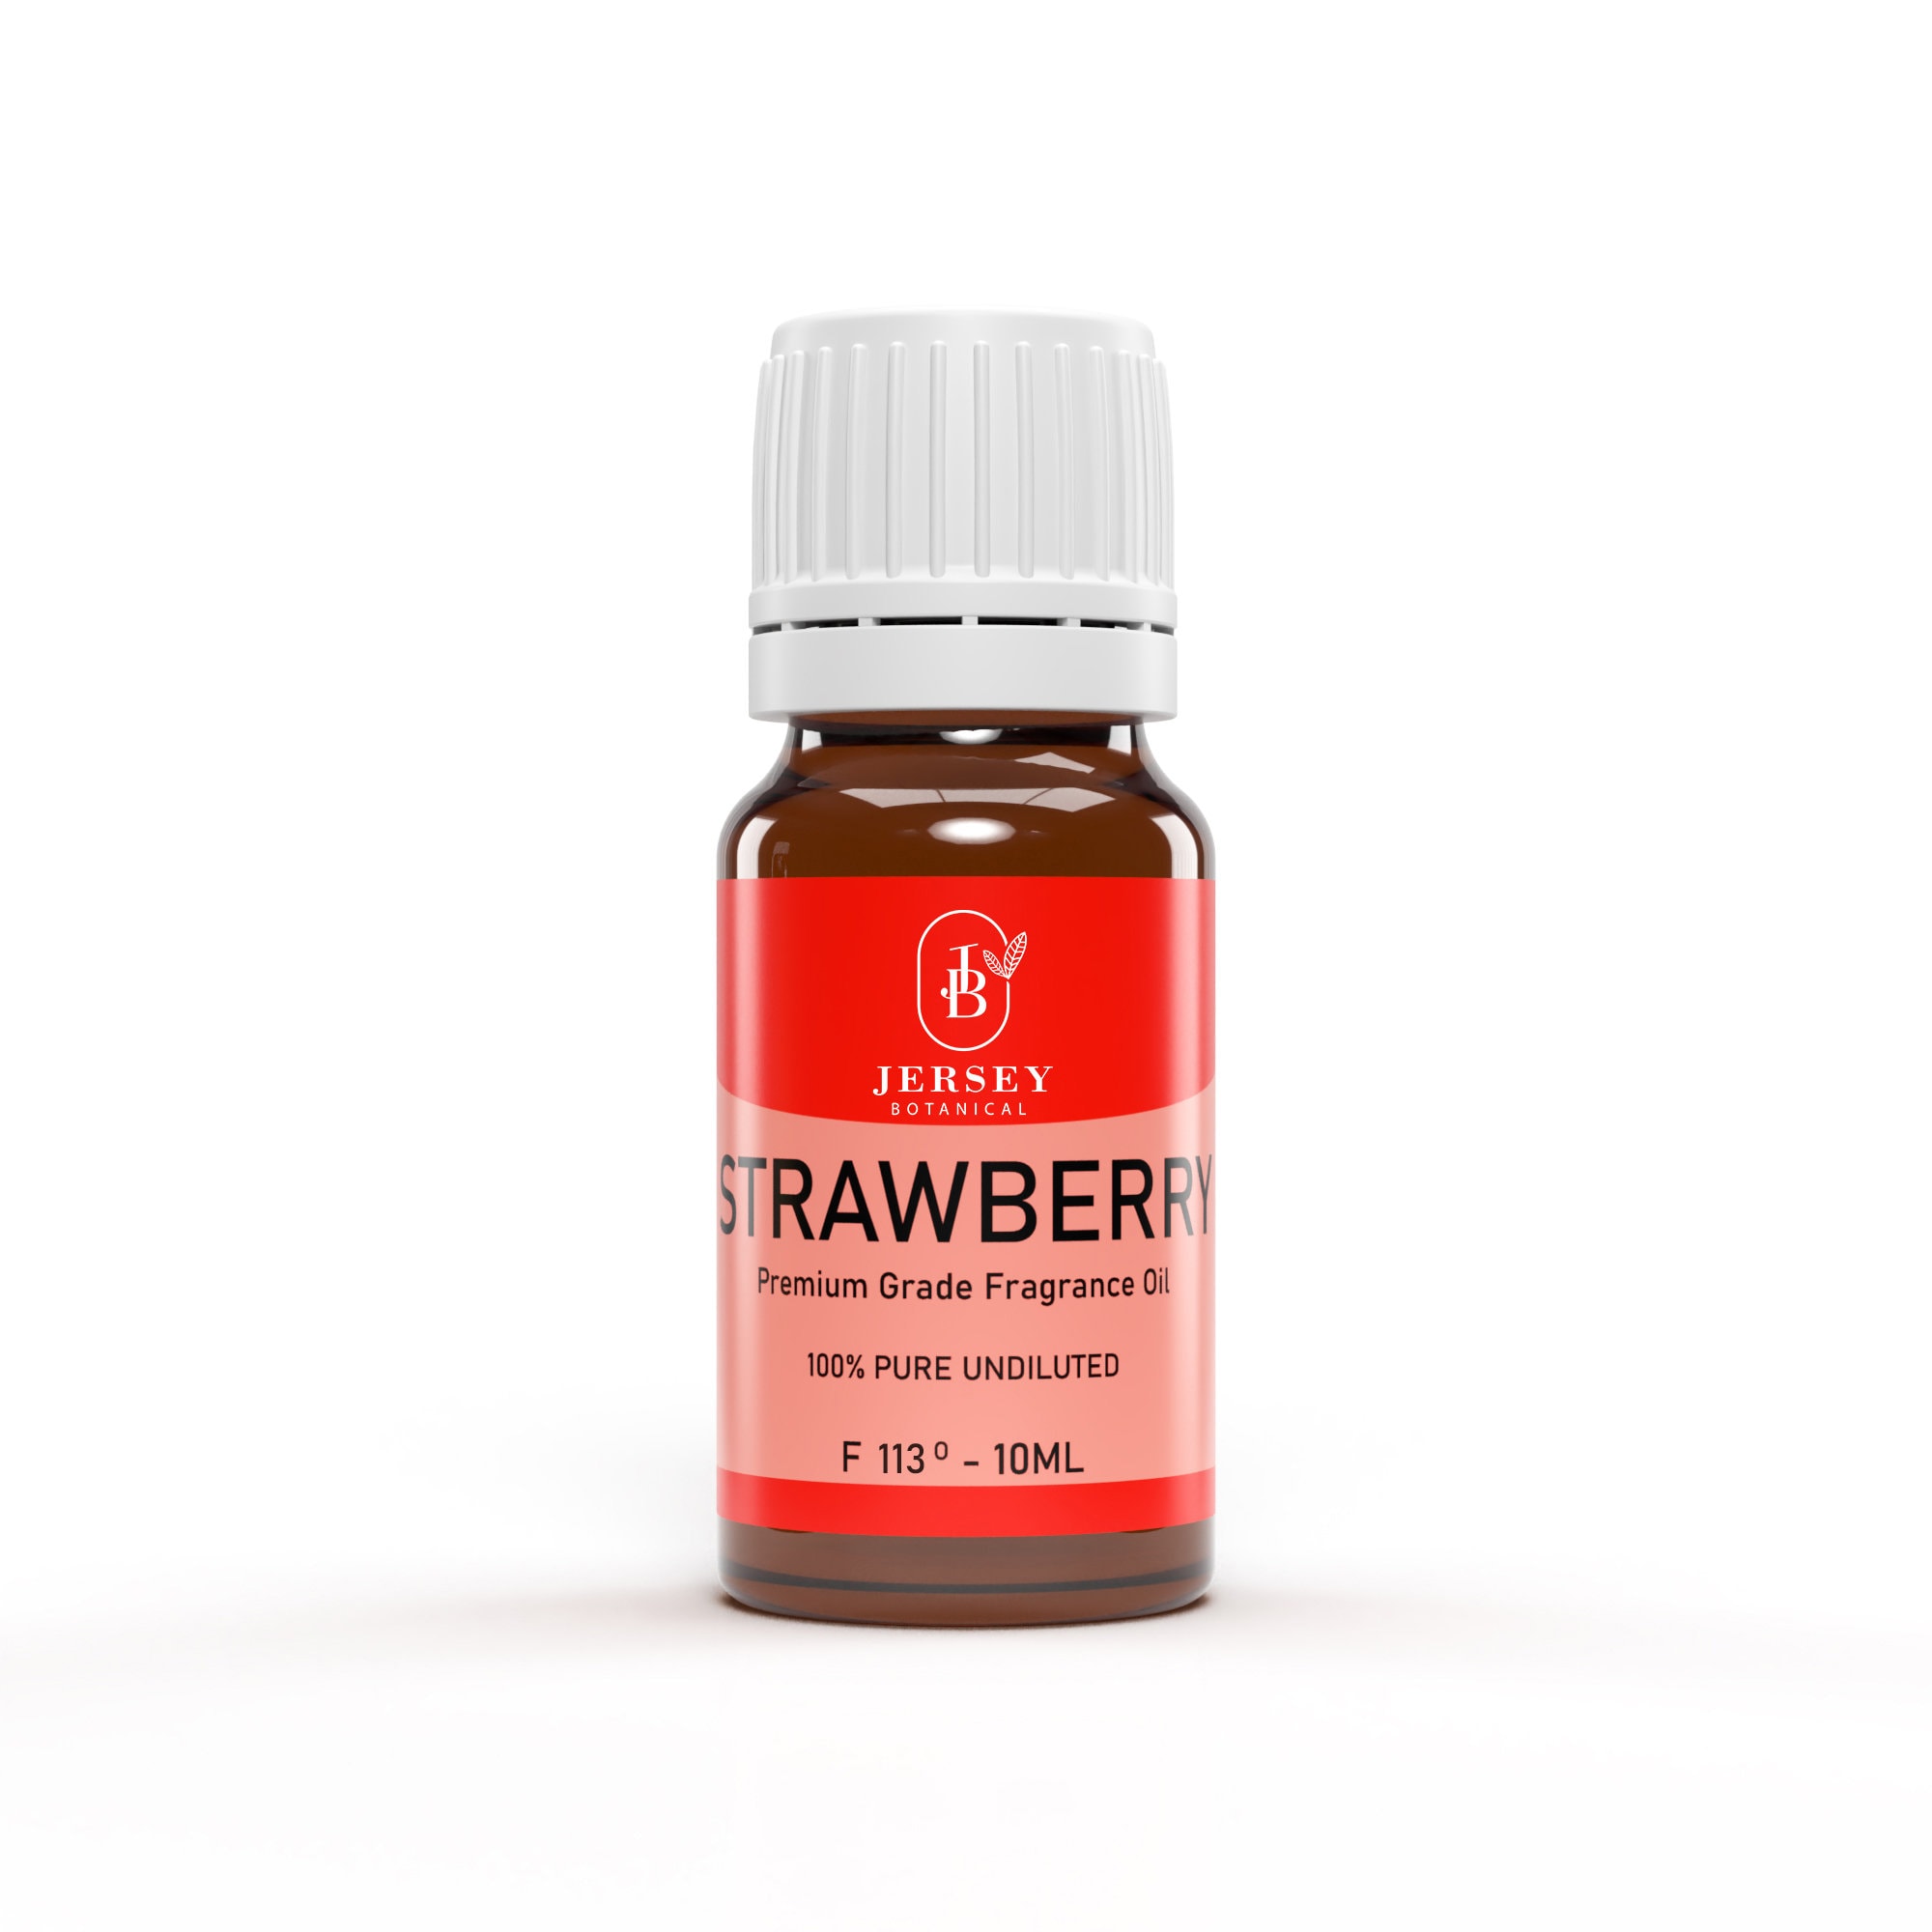 Strawberry Premium Grade Fragrance X10 Oil for Candles, Soaps